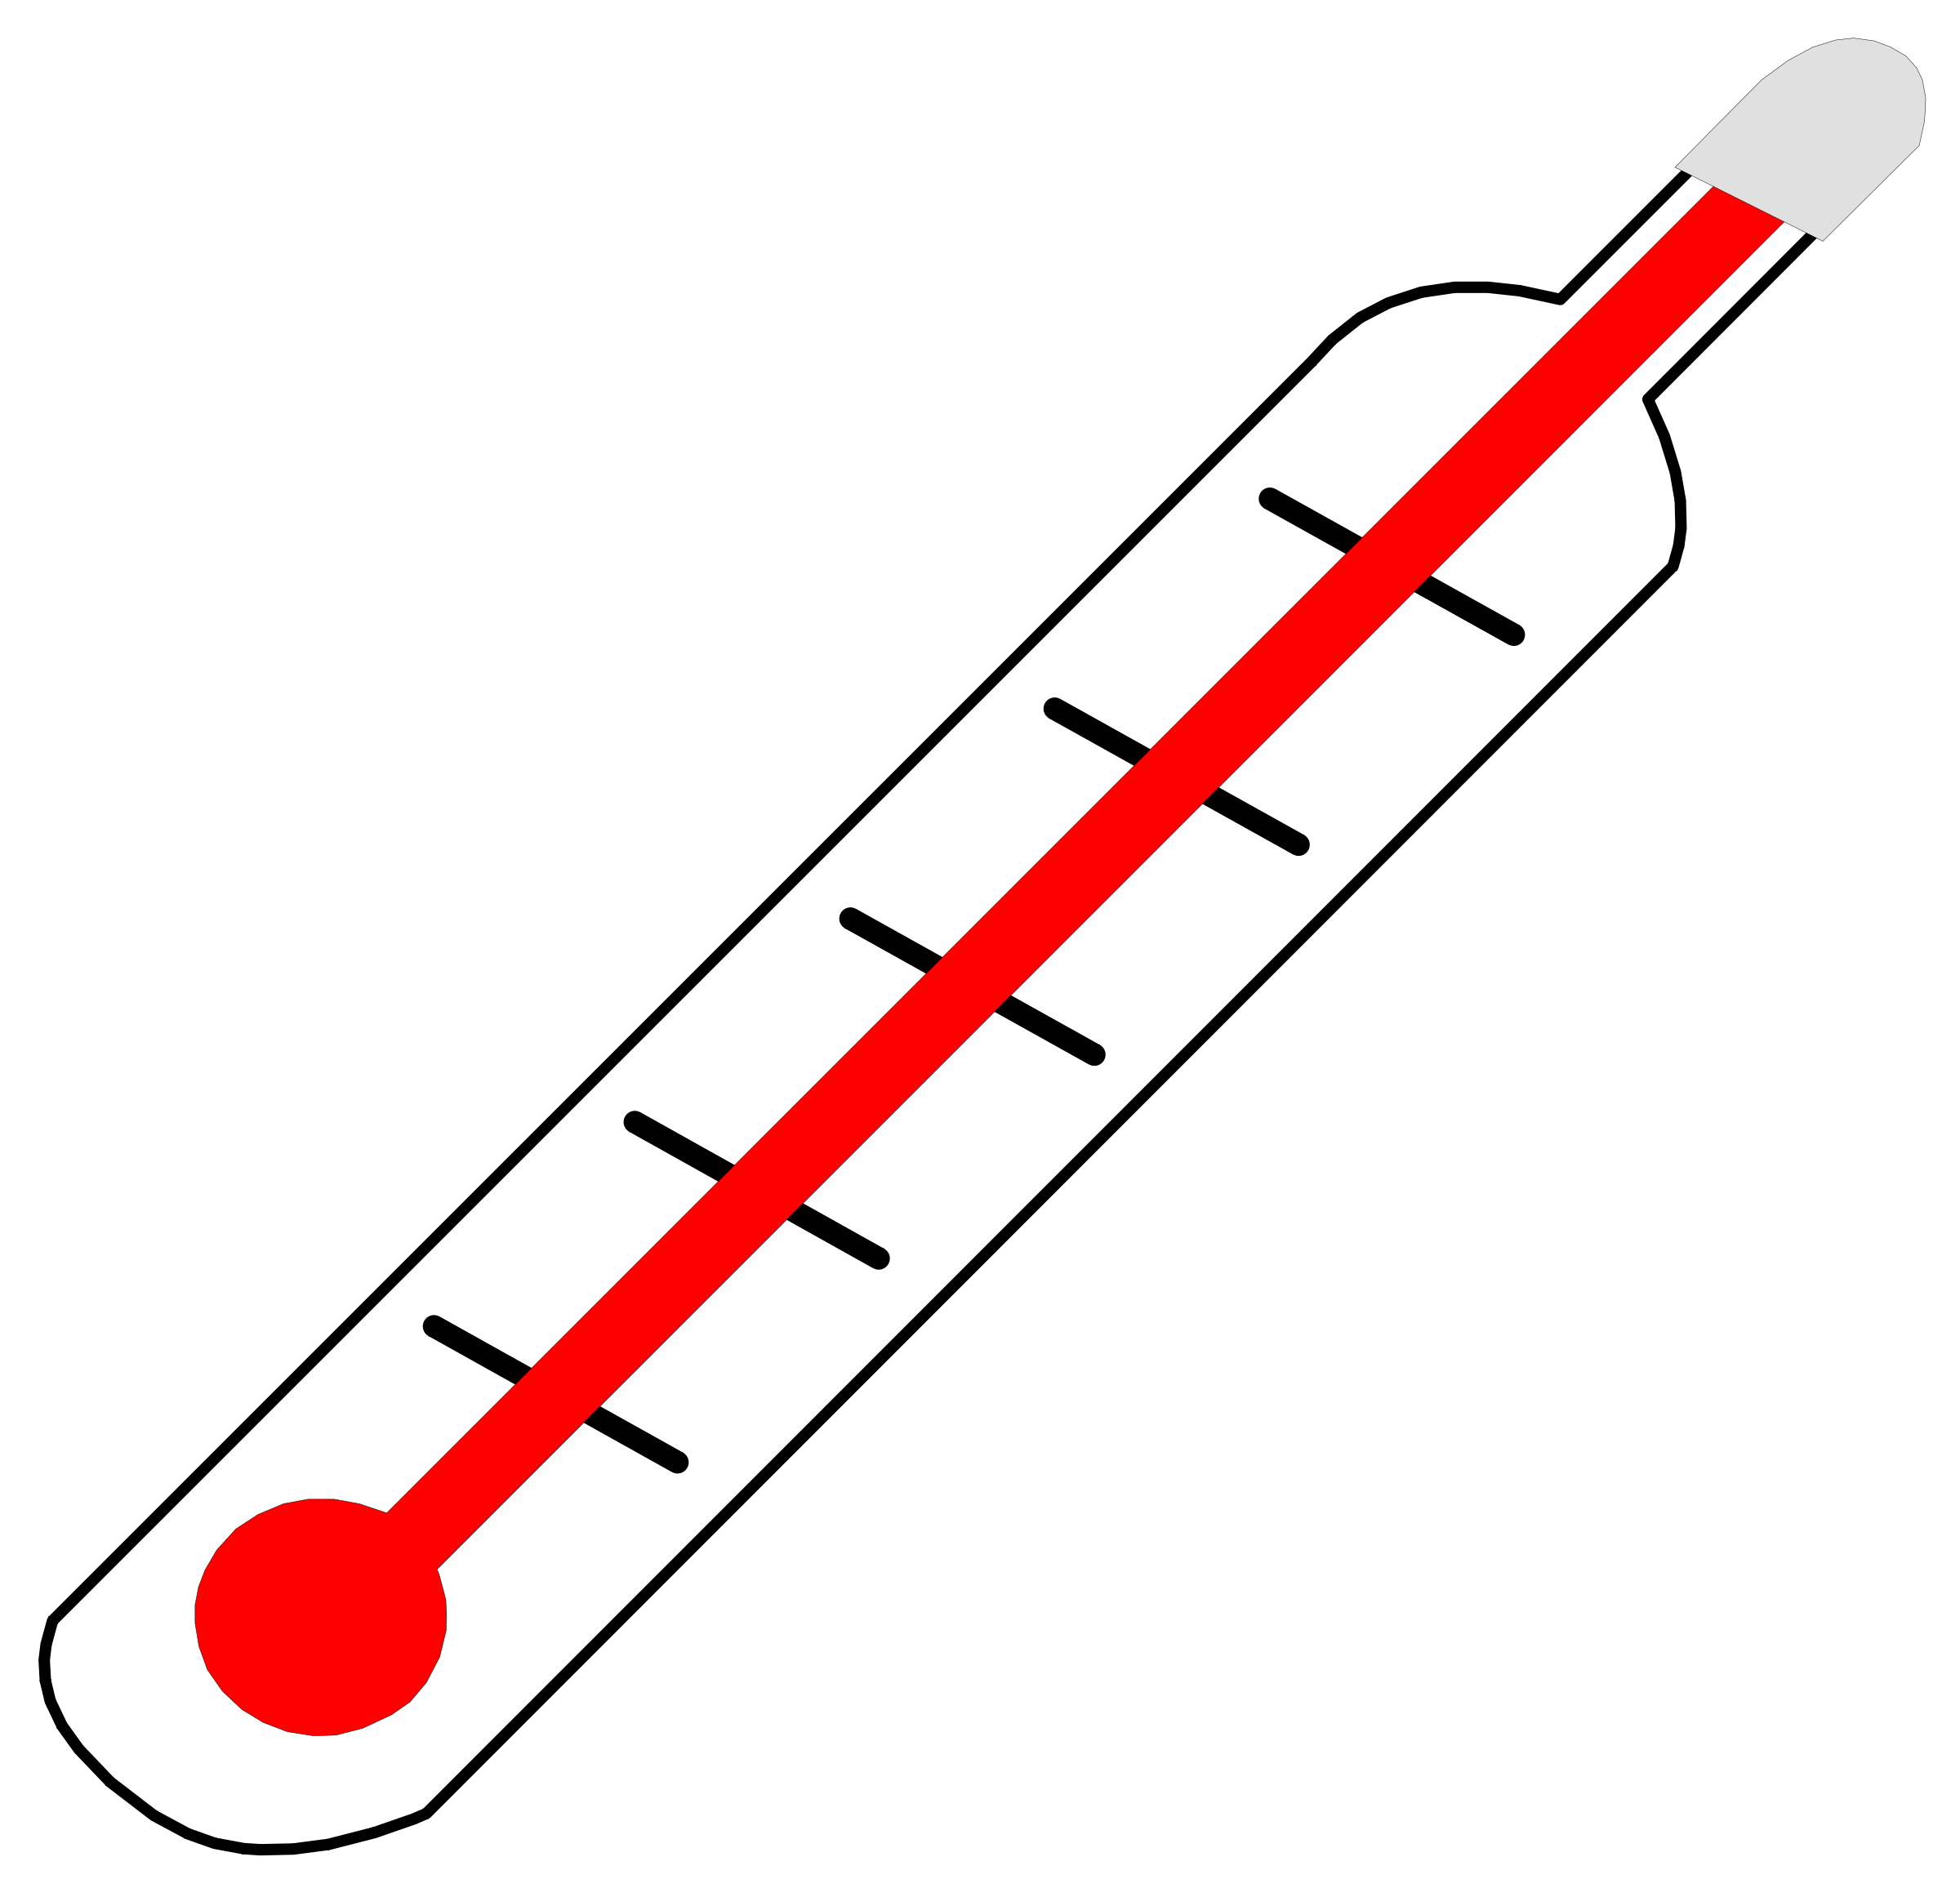 clipart thermometer coloring page